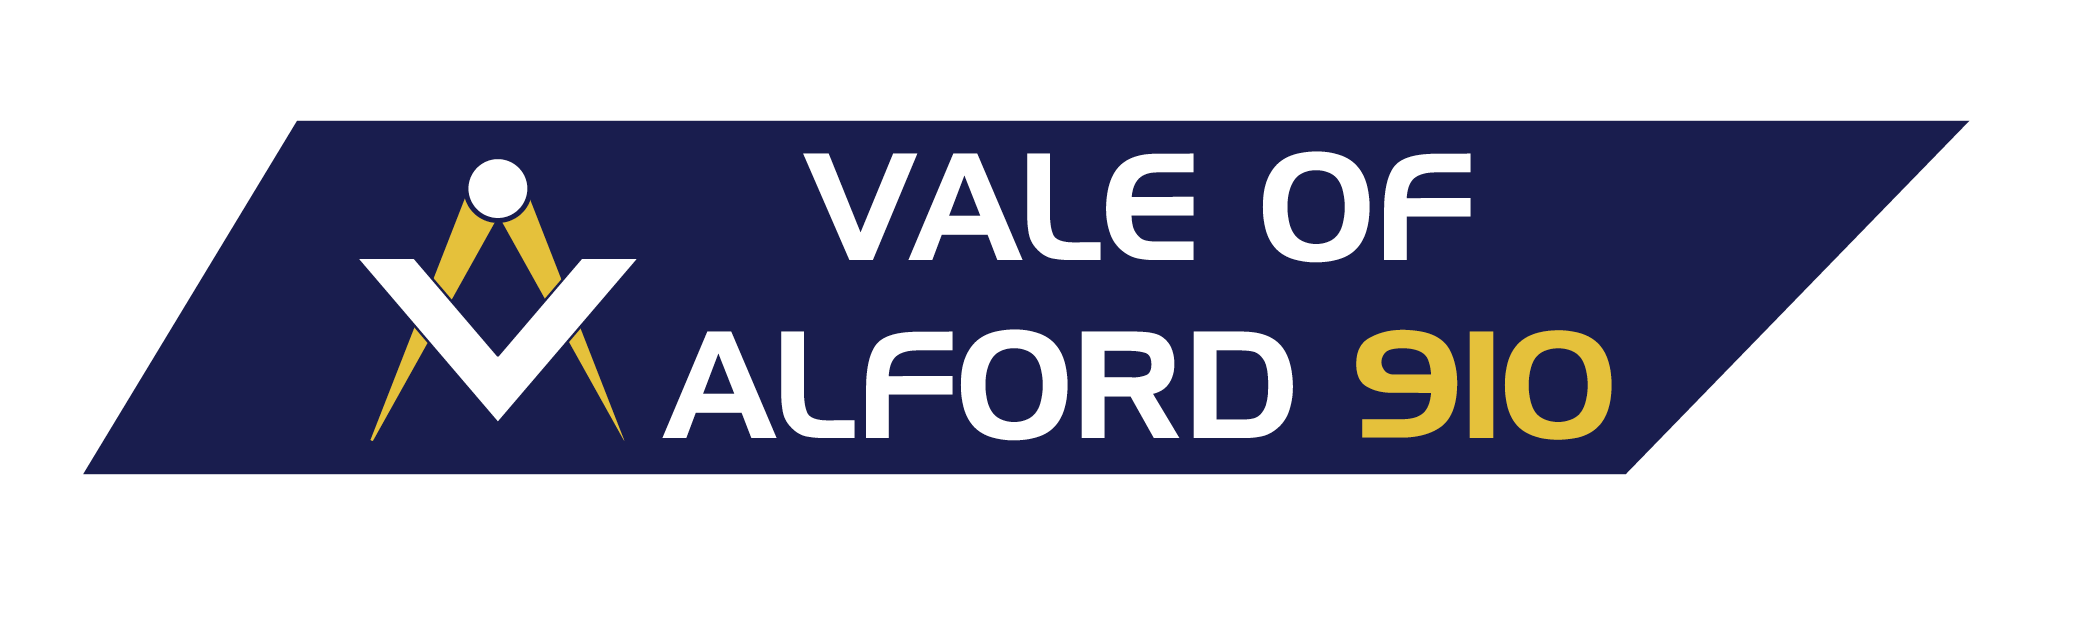 Vale of Alford 910